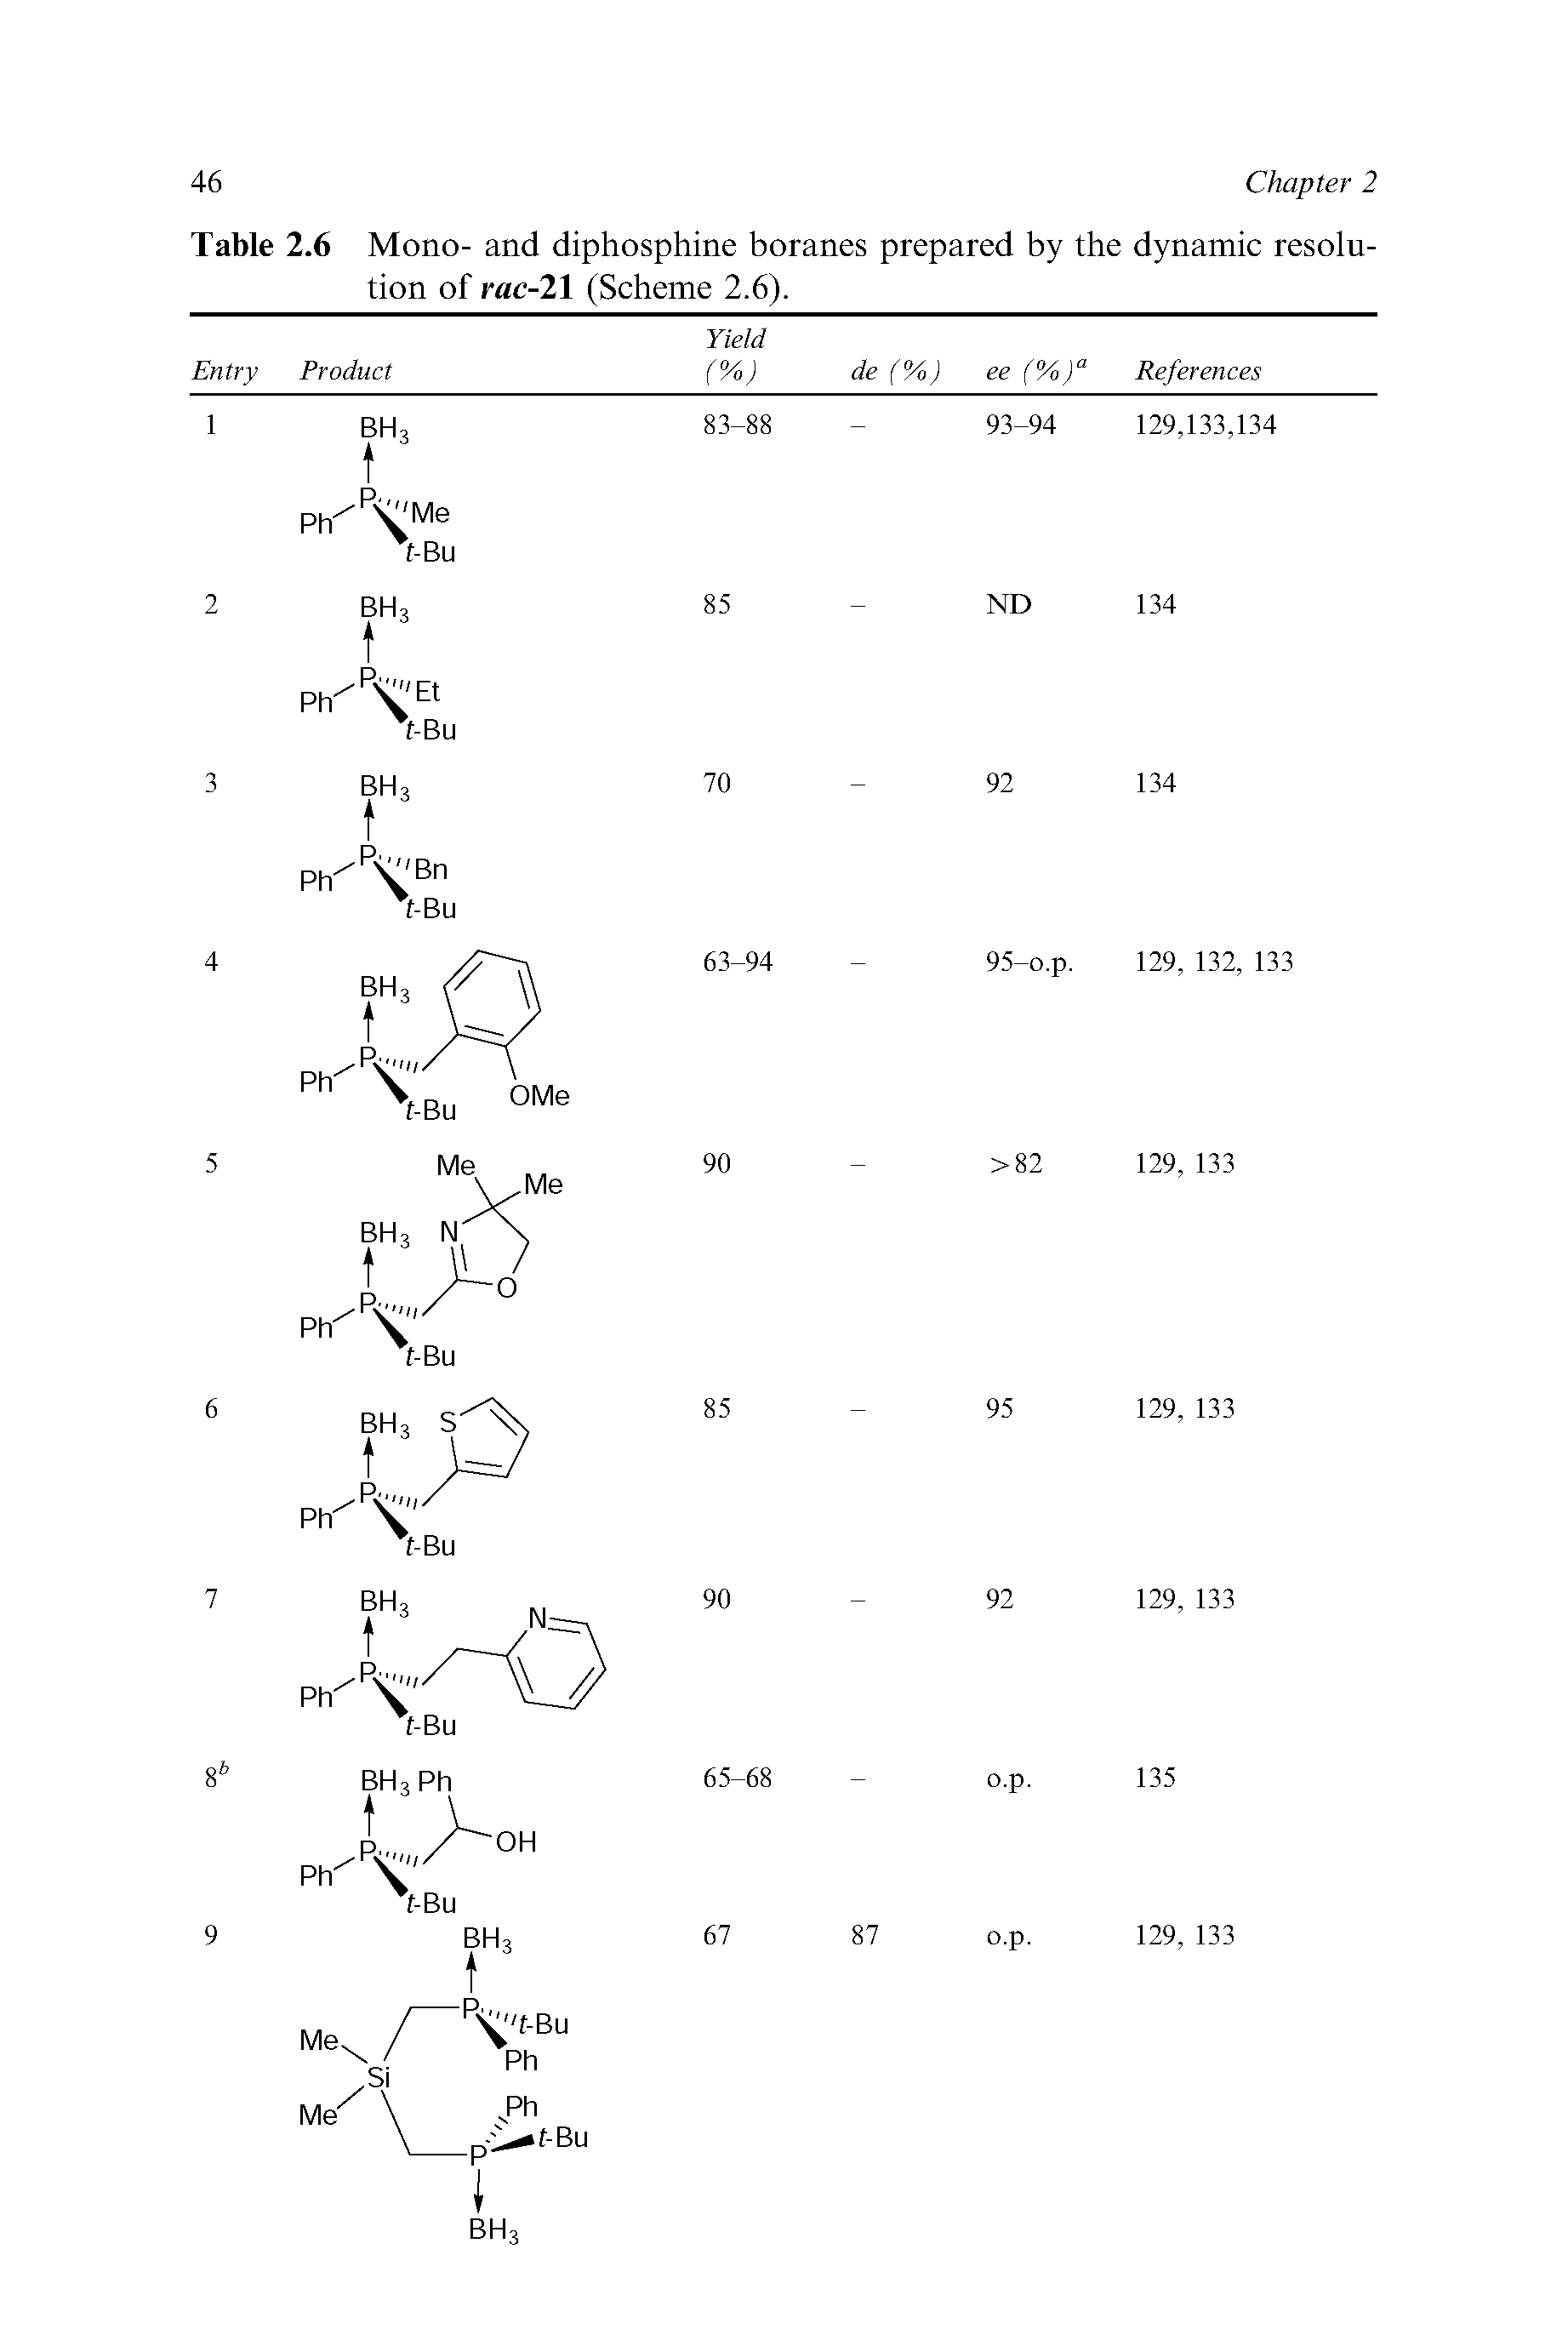 Table 2.6 Mono- and diphosphine boranes prepared by the dynamic resolution of rac-21 (Scheme 2.6).